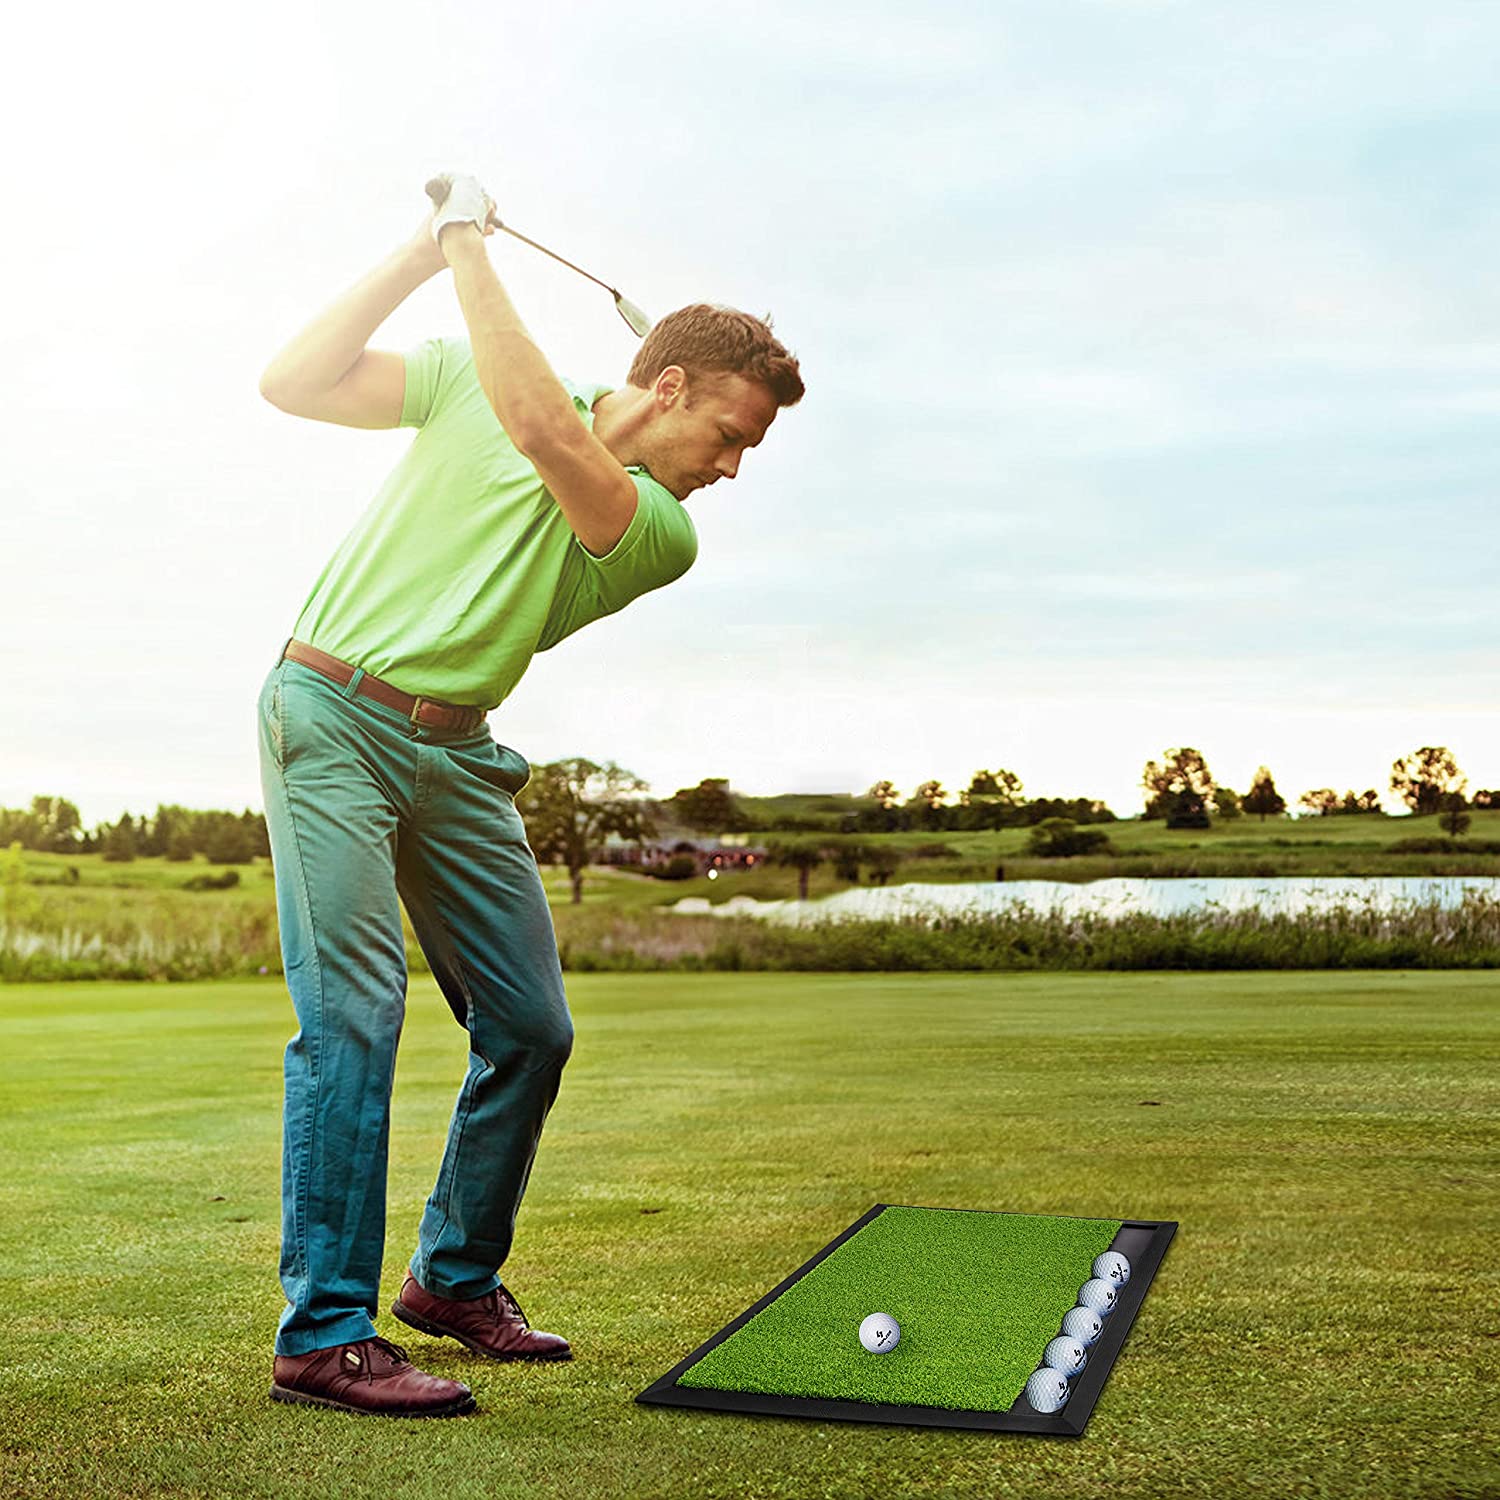 Golf Mat, Two Size Options (13" x 23", 12" x 24"Available)